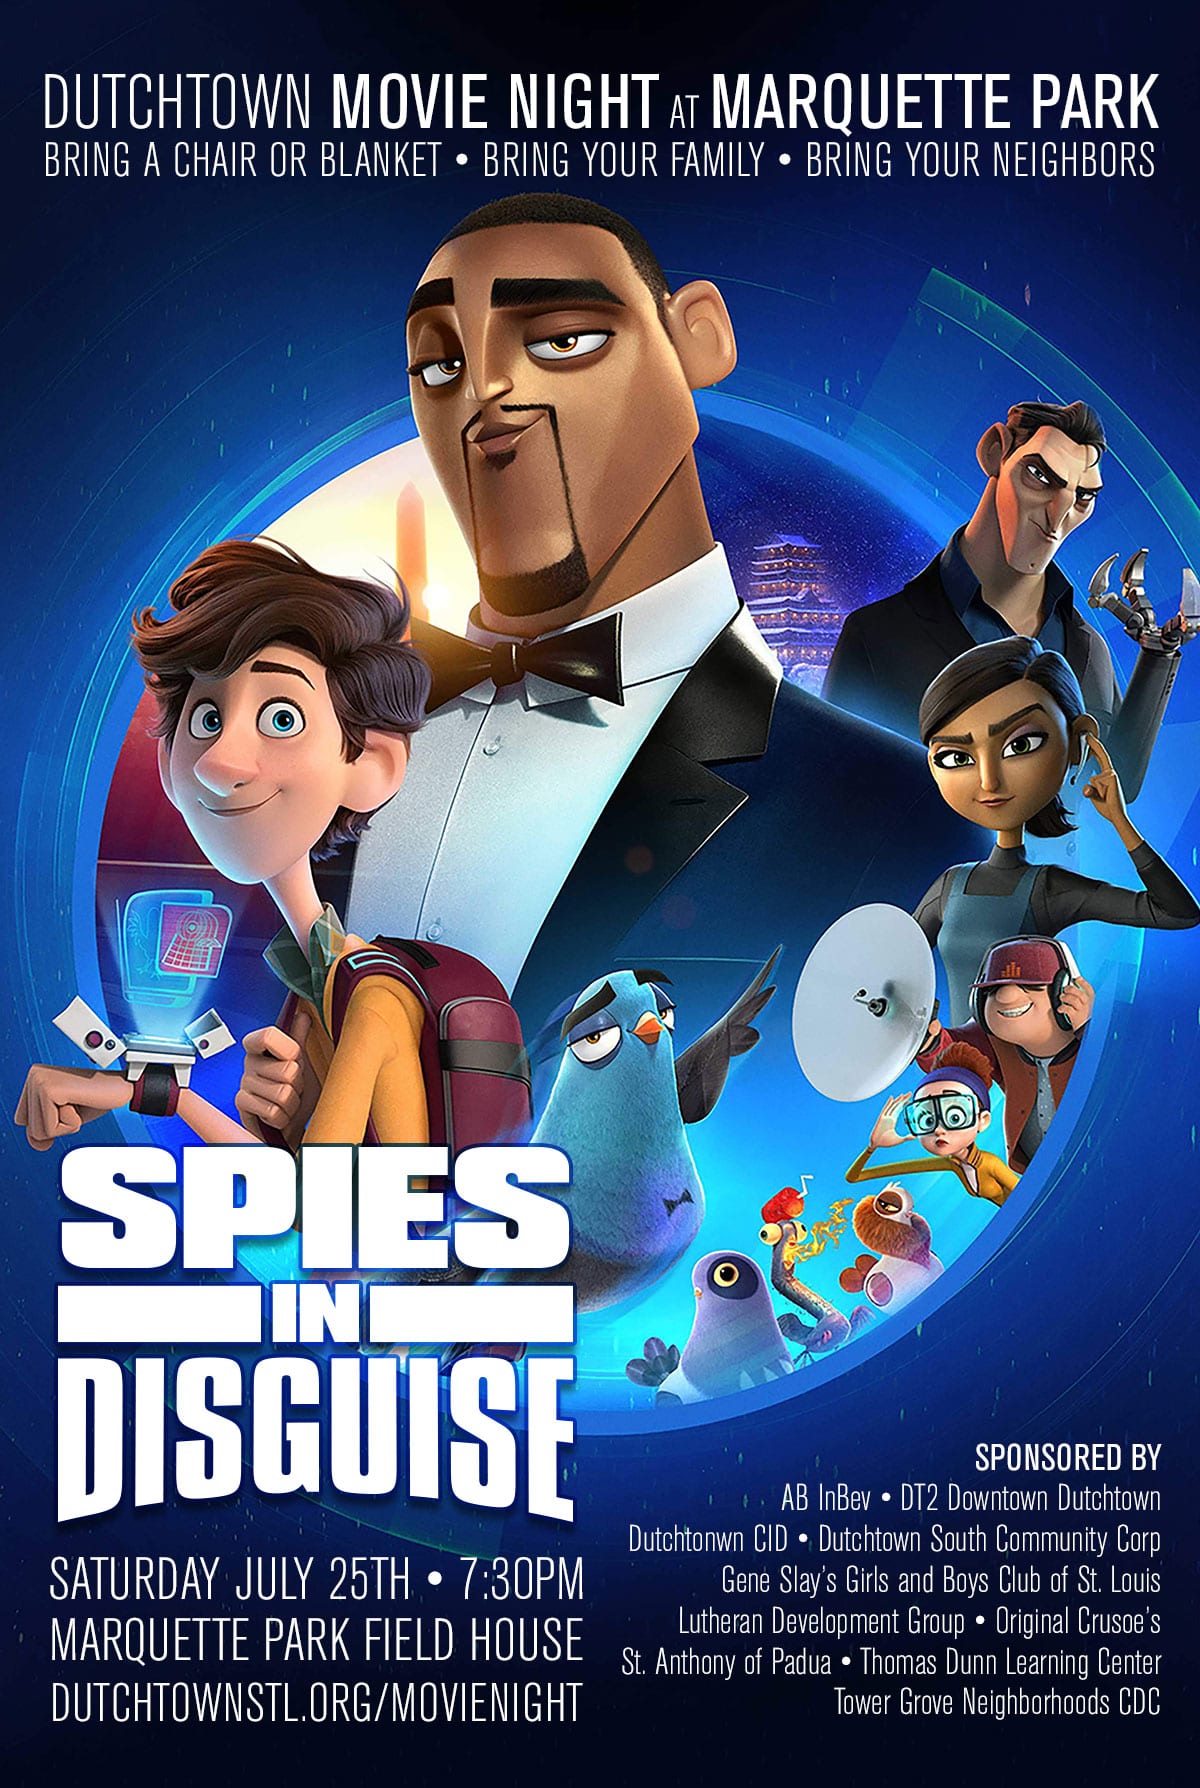 Poster for Dutchtown Movie Night at Marquette Park: Spies in Disguise.